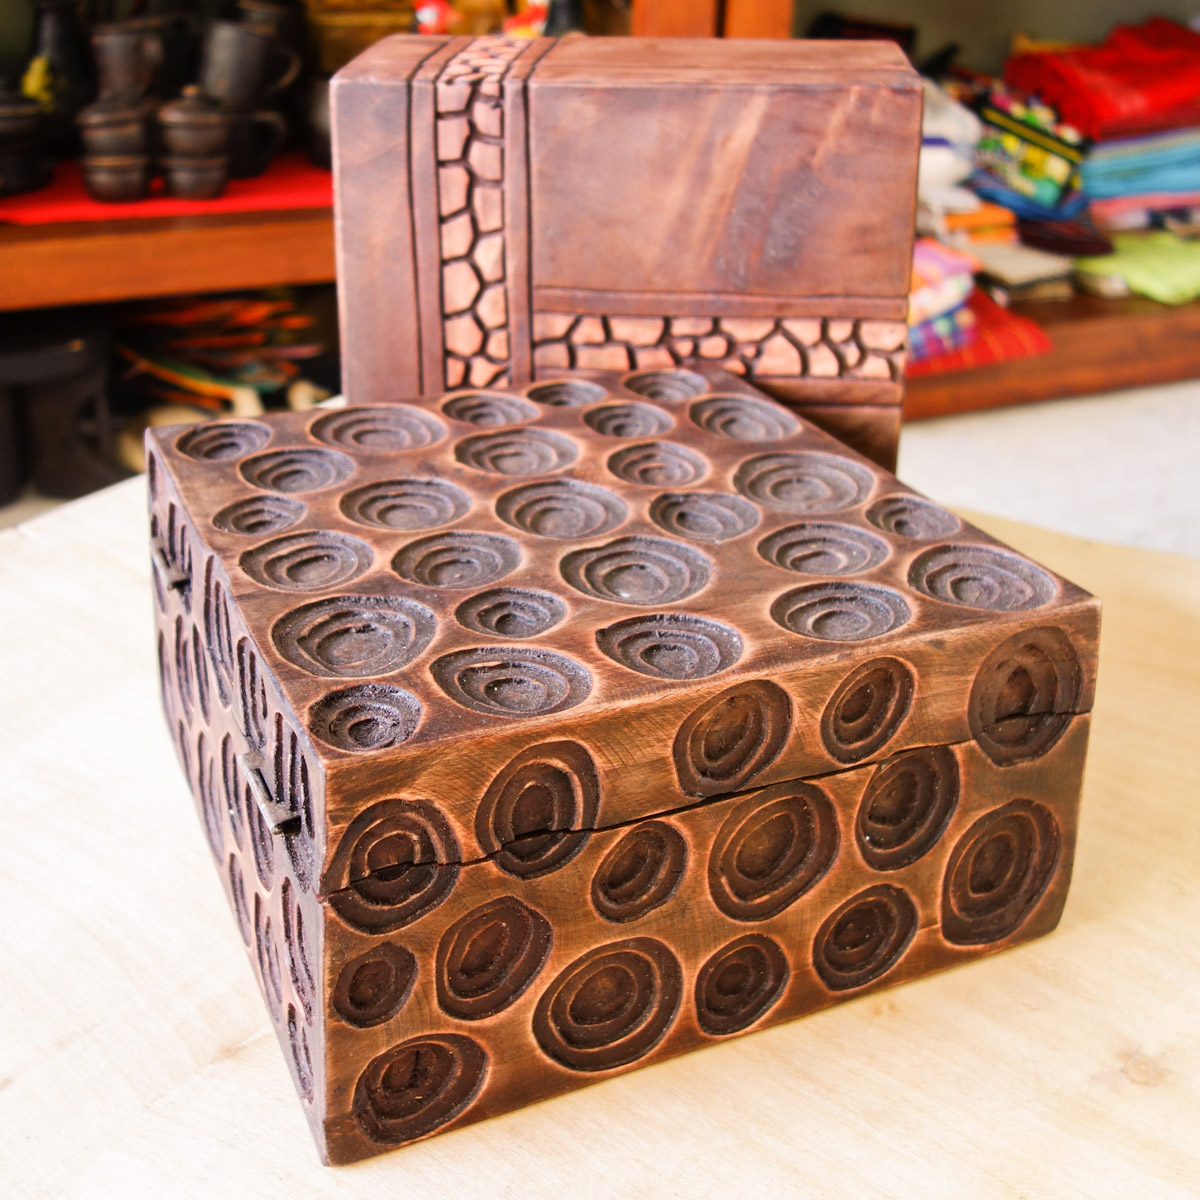 Decorative carved wooden boxes - Goodie's African Interiors & Gifts